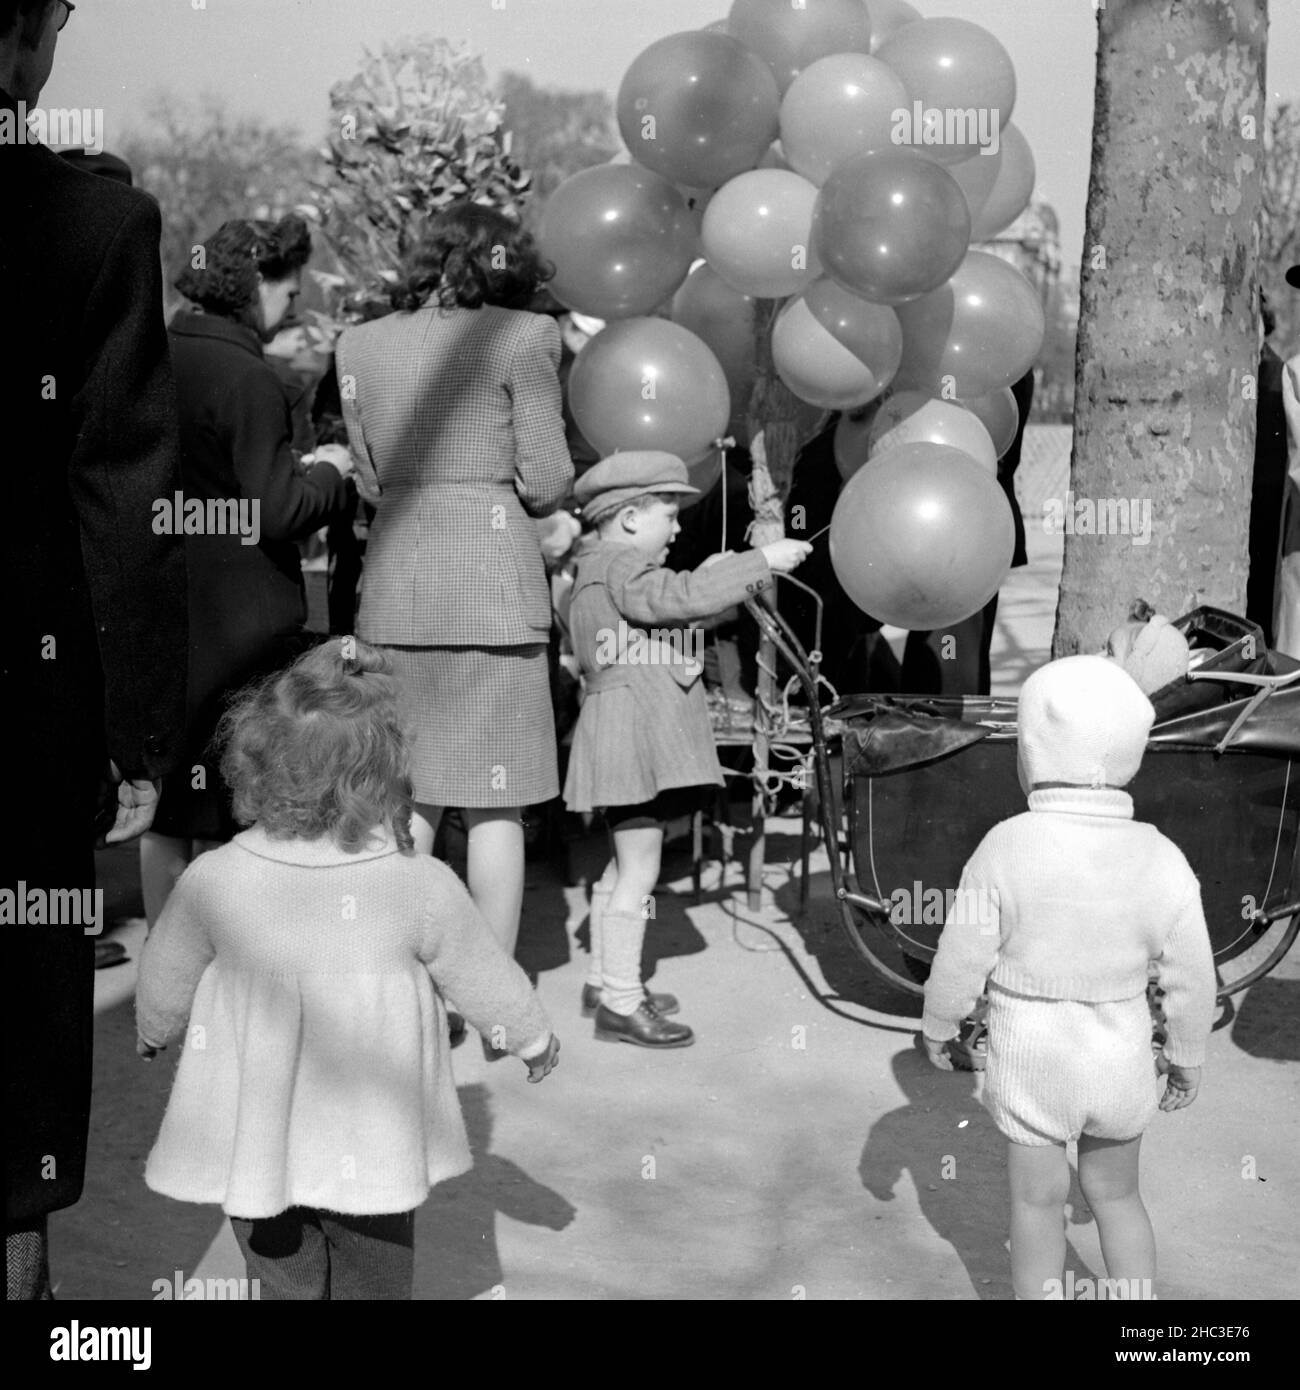 Two photographs of a scene where children are getting balloons in an unidentified Paris park in 1945. One photograph shows three parents, three children standing, and a partially obscured baby in a stroller. The other photo shows a smiling balloon-man (slightly out of focus) surrounded by several men. Some of the men wear uniforms. Stock Photo